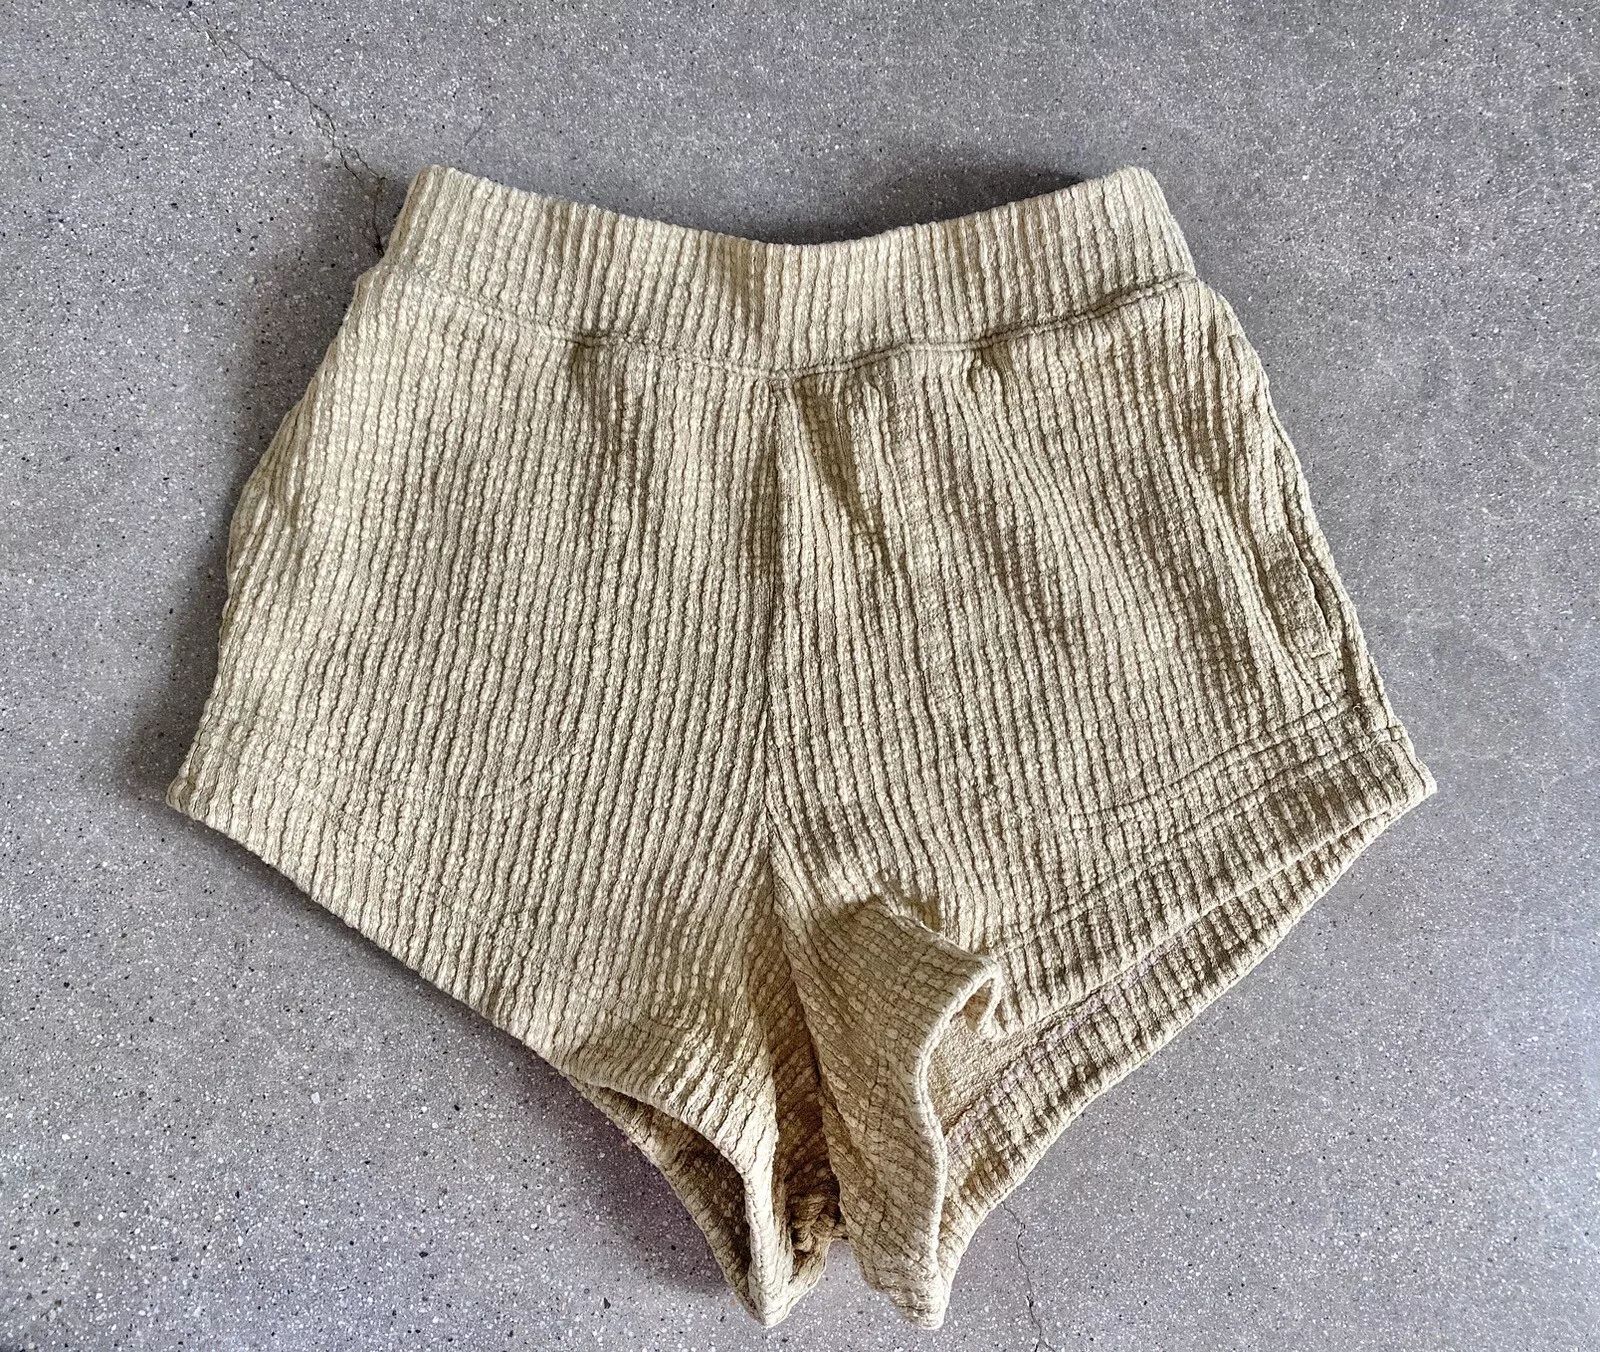 FP Beach (Free People) french cut high wisted ribbed shorts women's S | eBay US